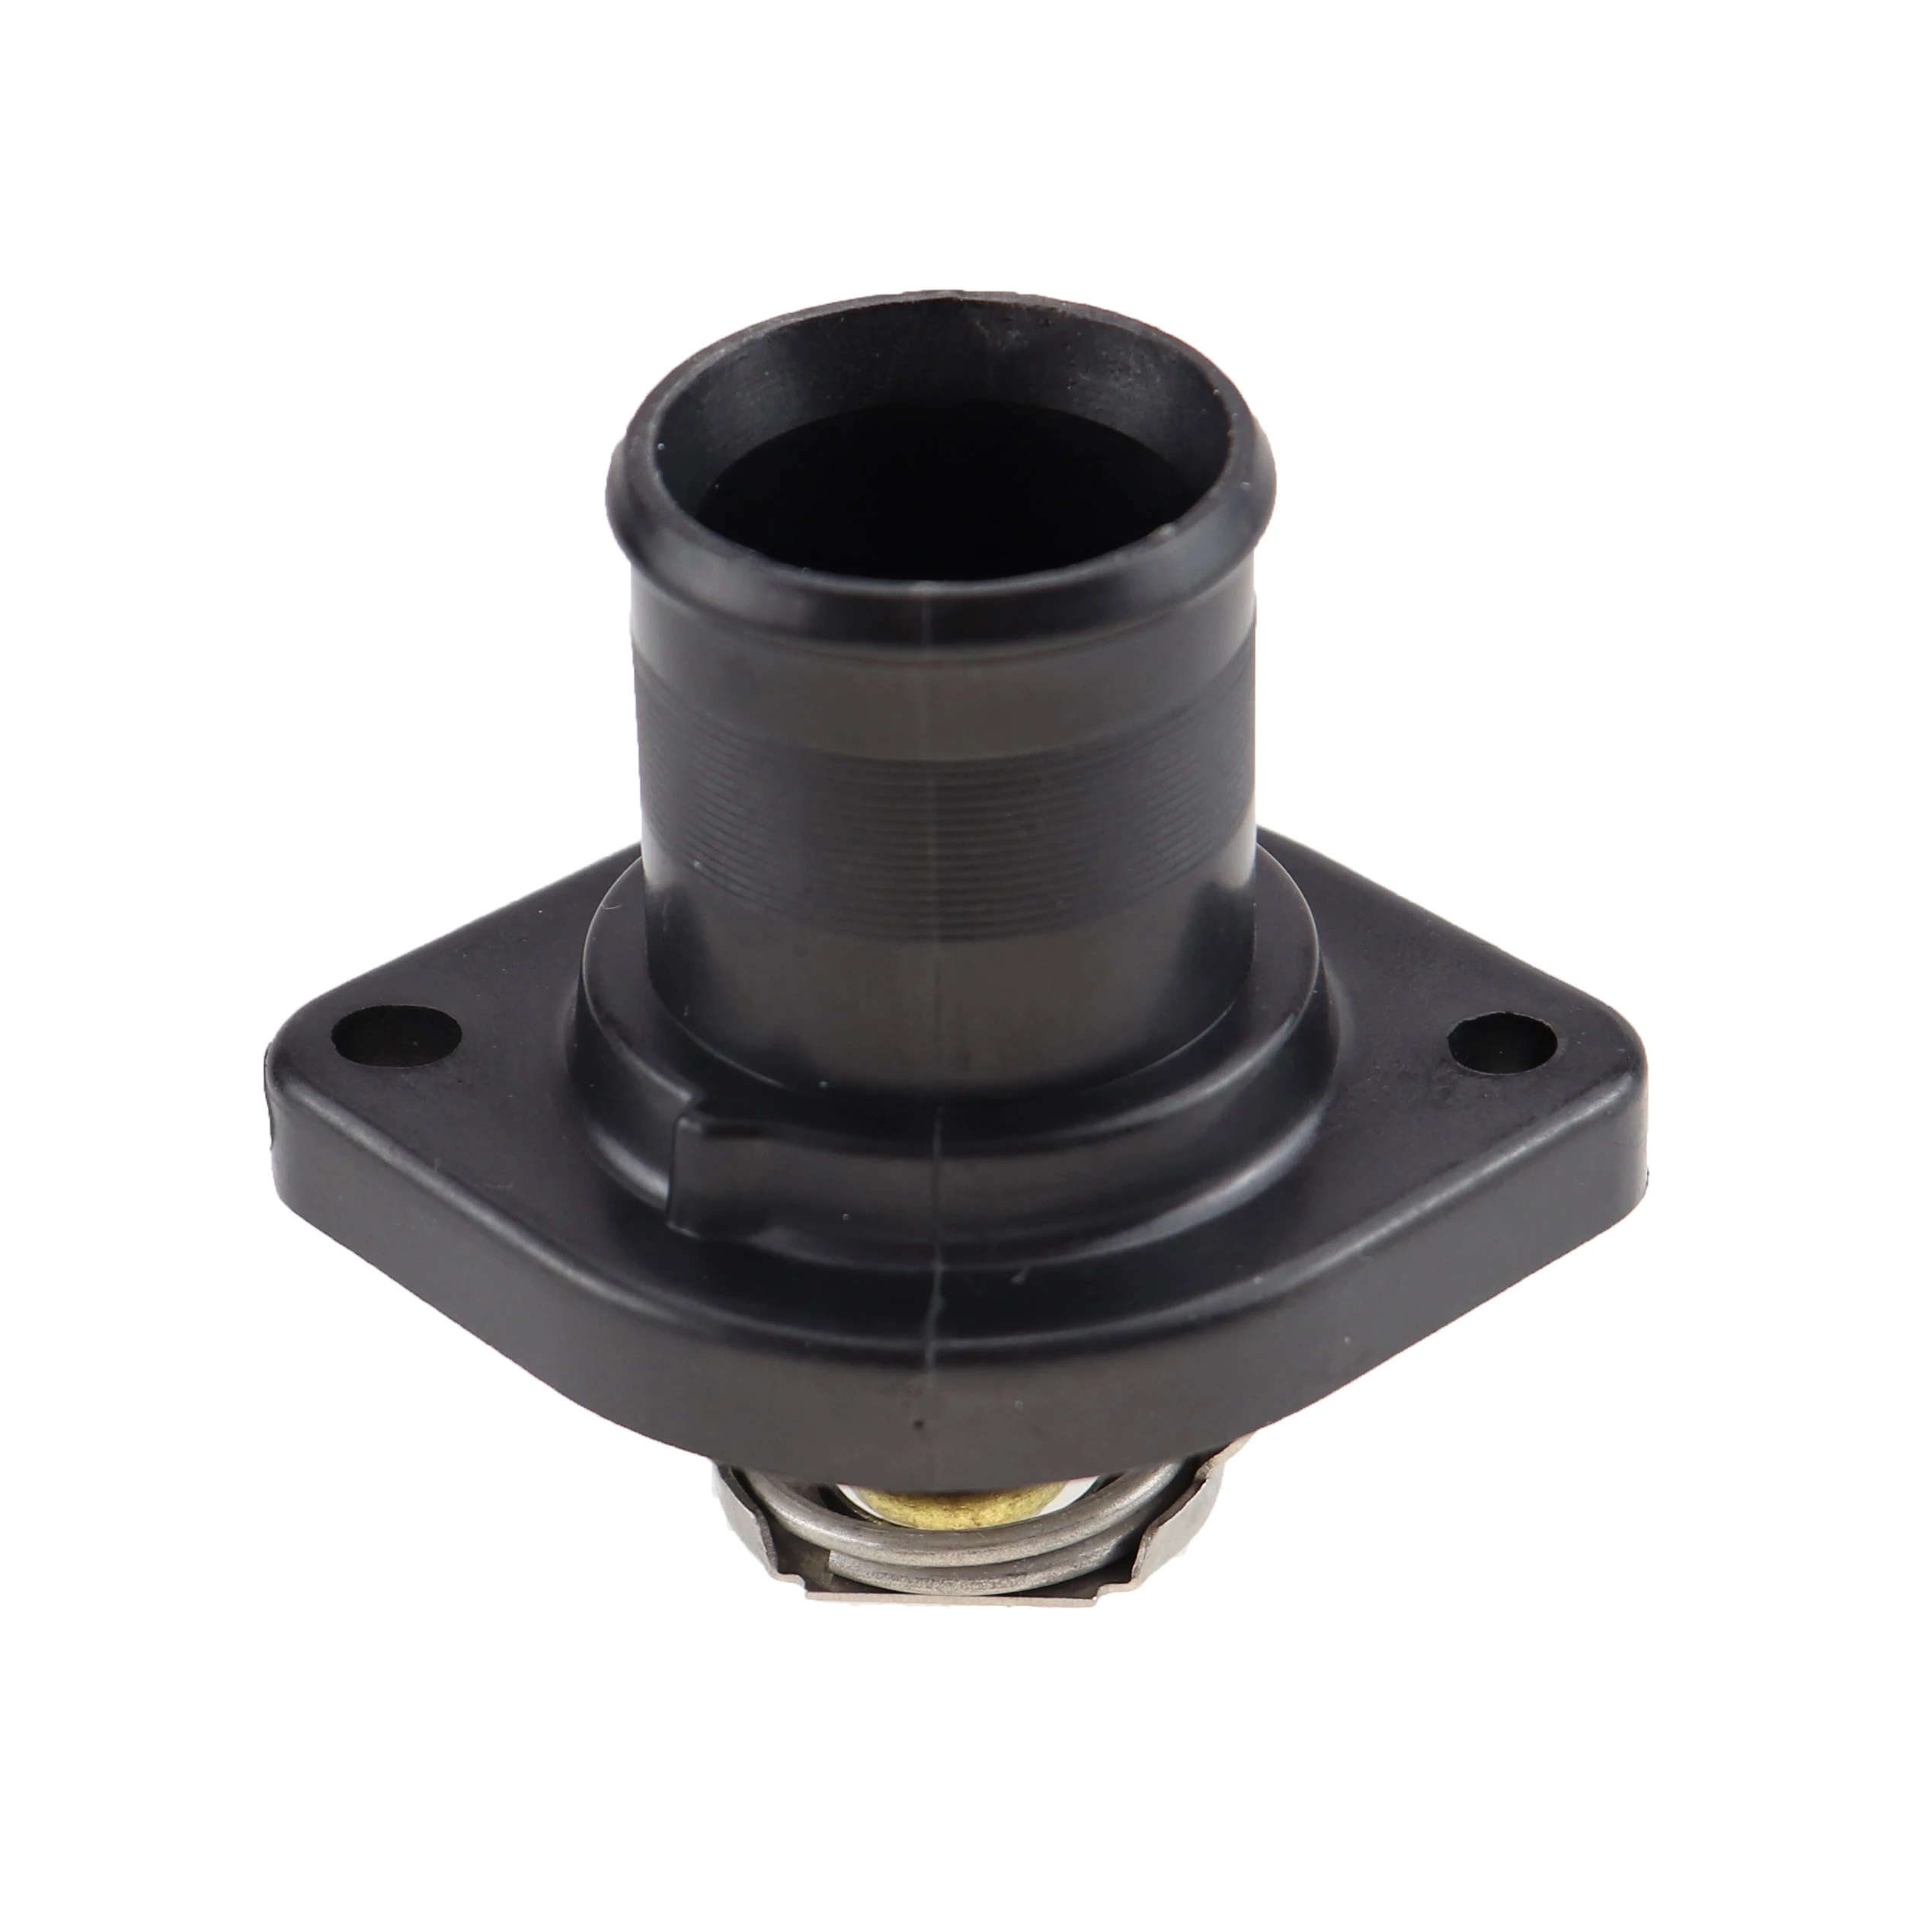 Coolant connection pipe compatible with OEM 1336.N8 C43105 AERZETIX 